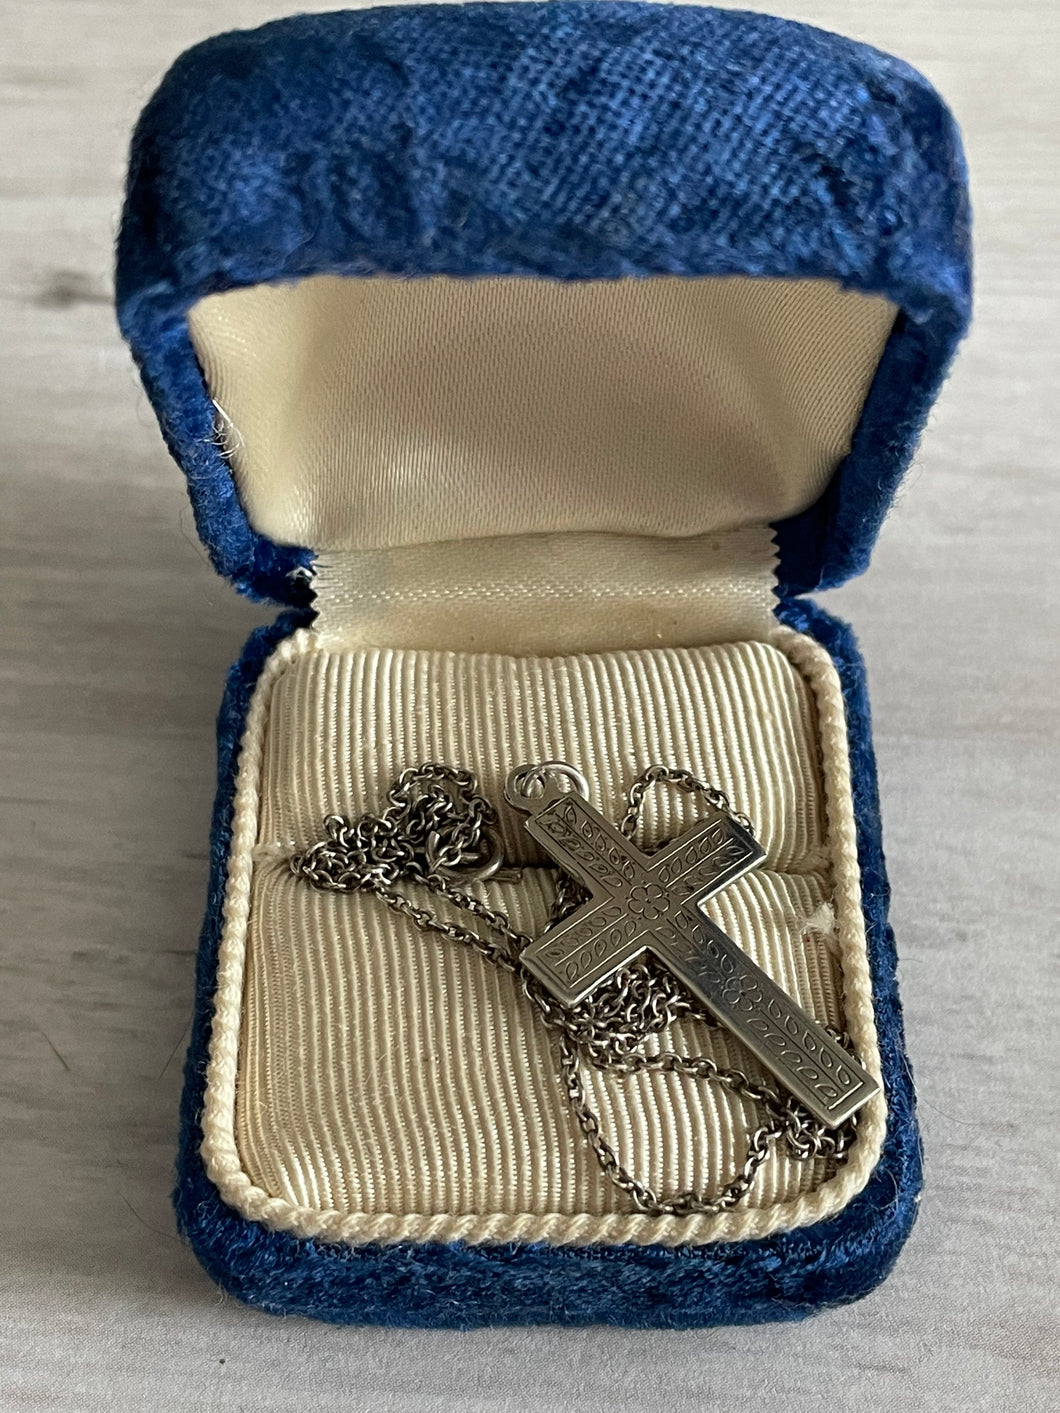 antique silver cross with chain, featuring an embossed flower and leaf design, places in an antique blue velvet ring box